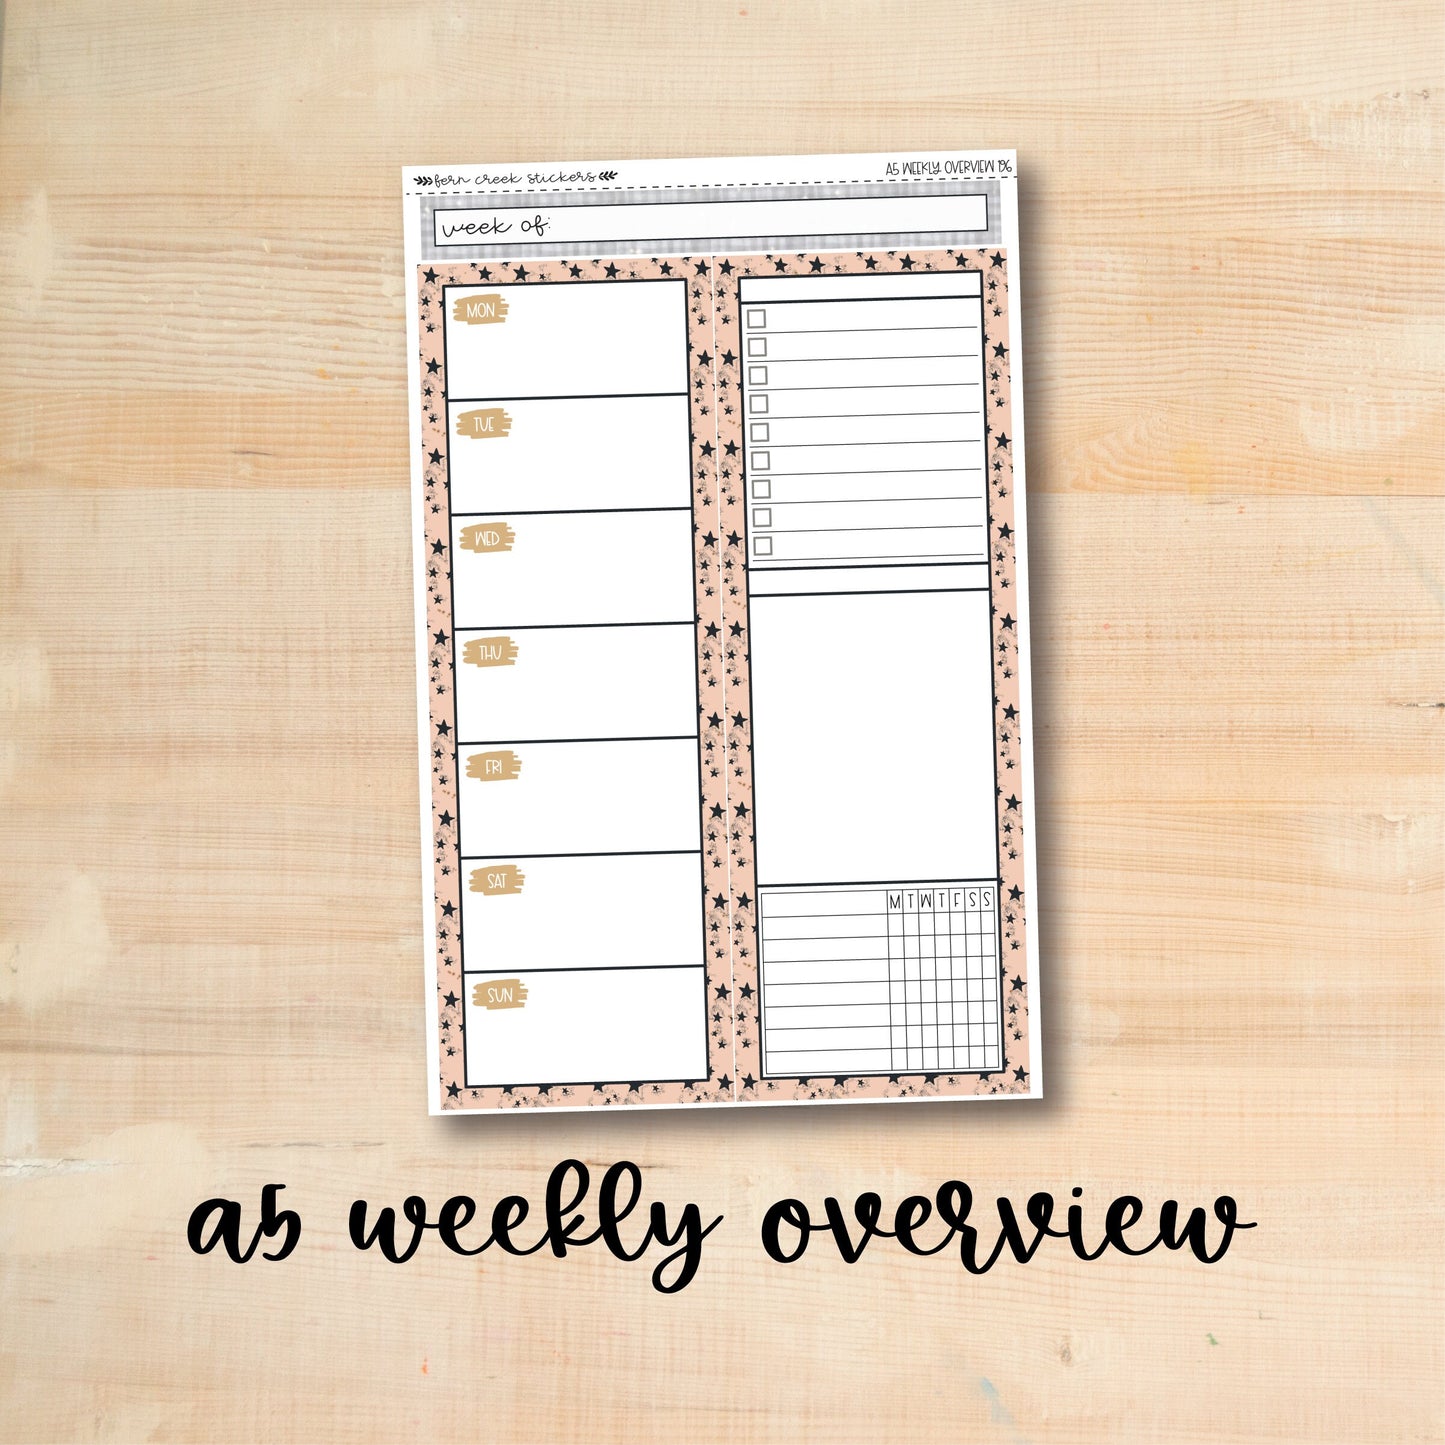 A5-WO 196 || MIDNIGHT PARTY A5 Daily Duo Erin Condren Weekly Overview